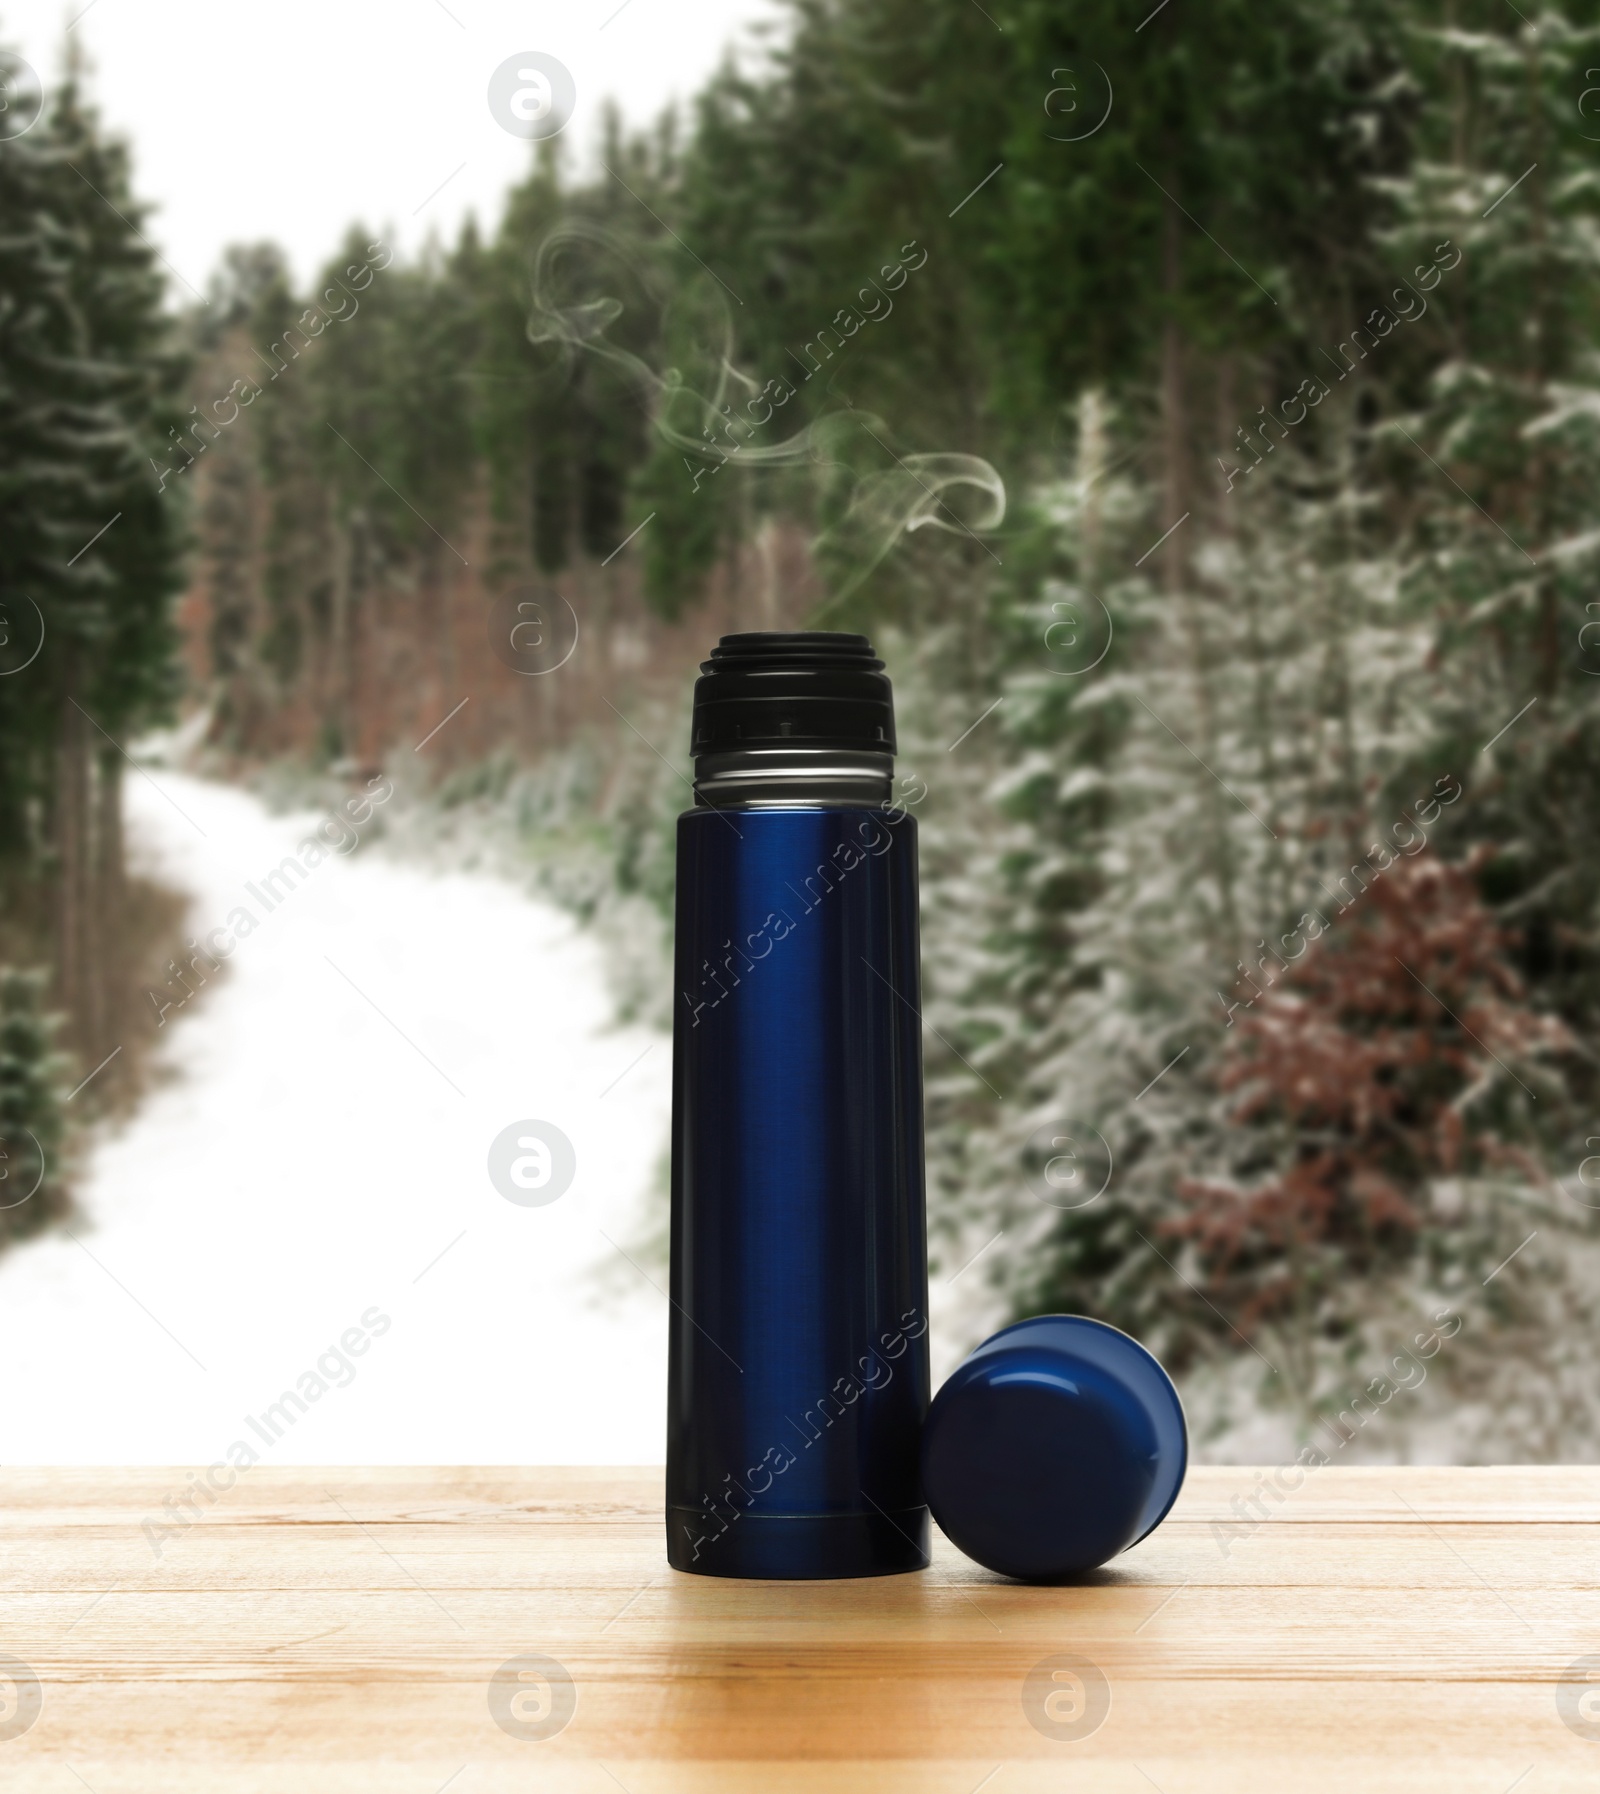 Image of Blue thermos on wooden table in snowy forest